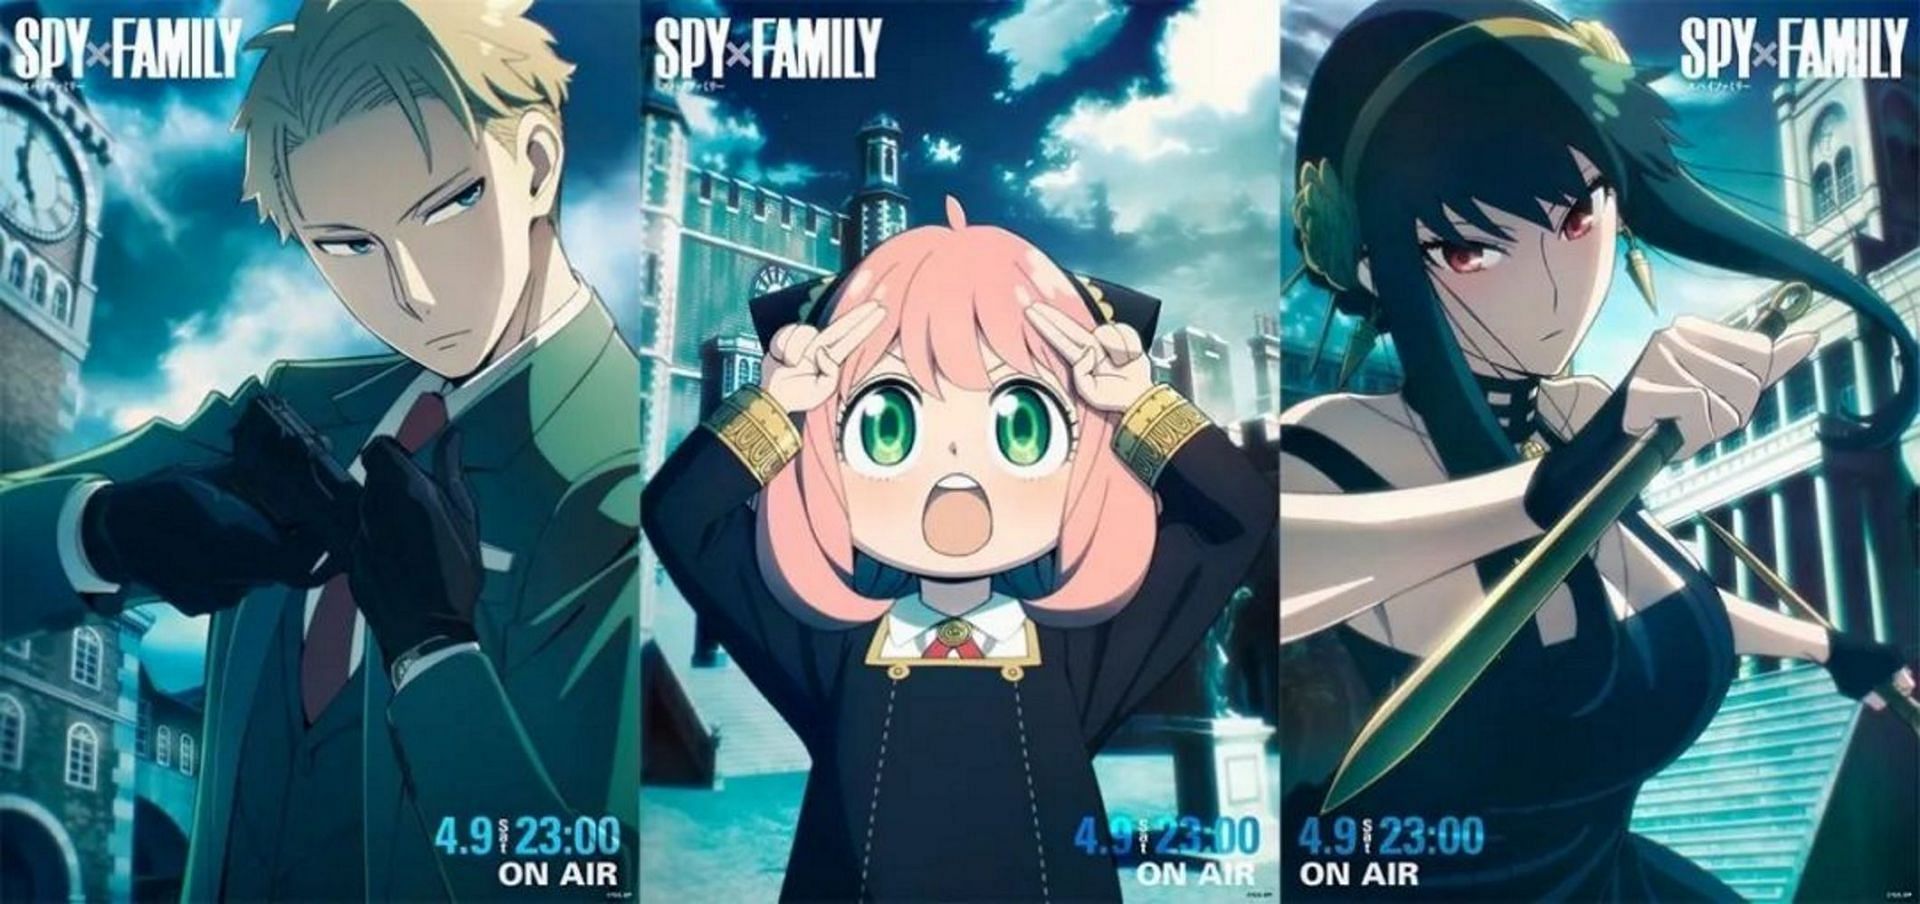 Spy x Family: Where to Watch this hit anime series